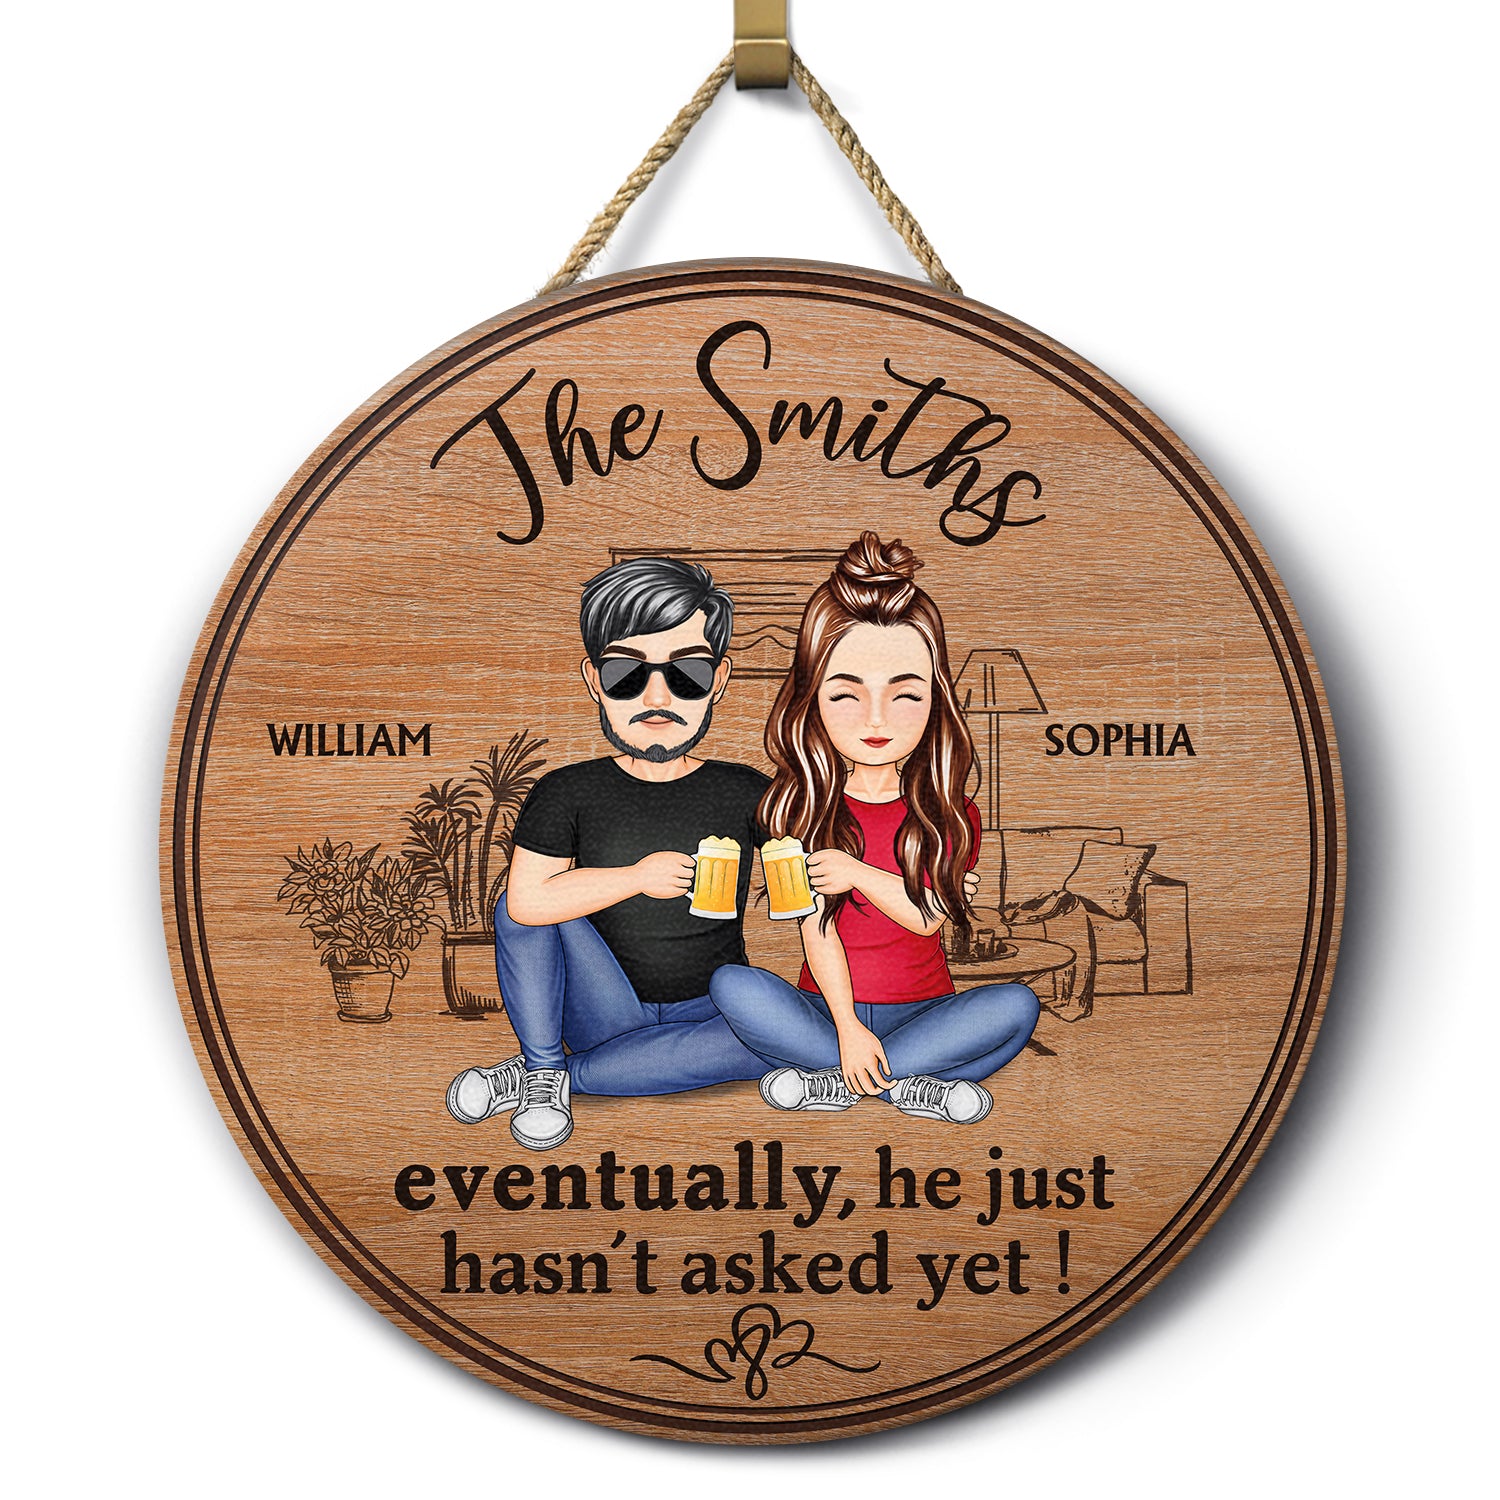 Eventually He Just Hasn't Asked Yet Family - Home Decor Gift For Spouse, Lover, Husband, Wife, Boyfriend, Girlfriend, Couple - Personalized Custom Wood Circle Sign